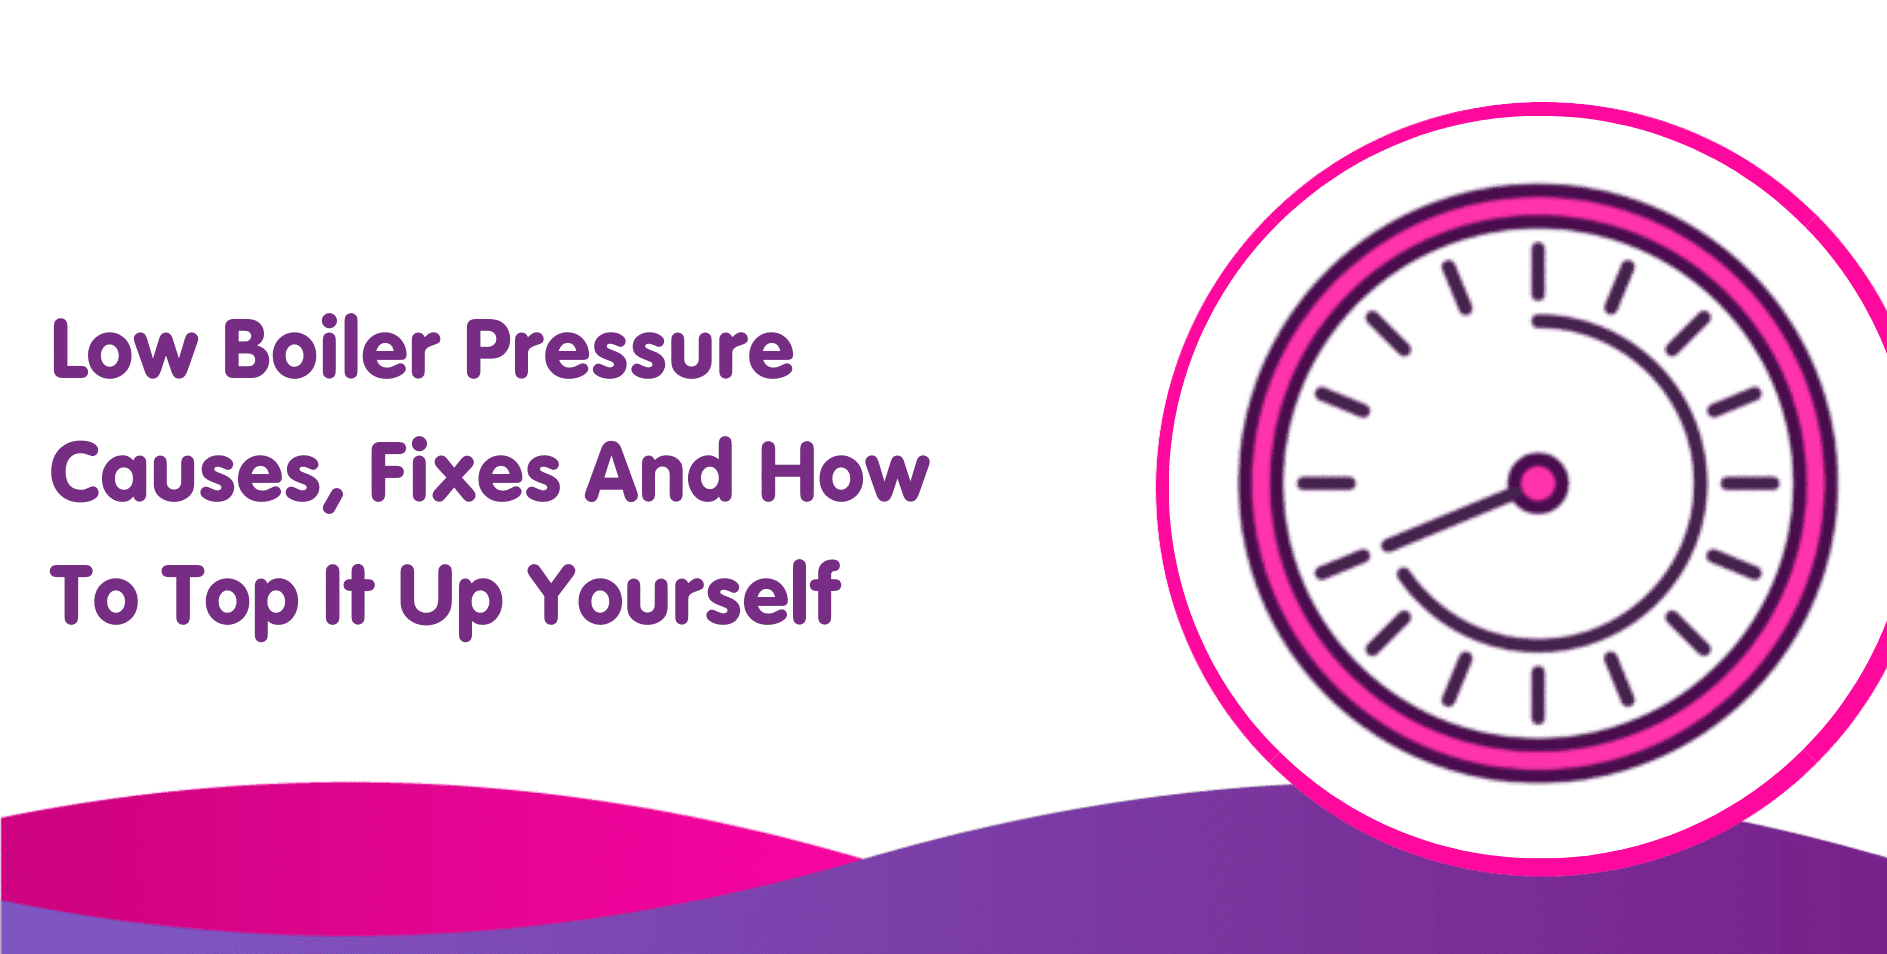 Low Boiler Pressure Causes, Fixes And How To Top It Up Yourself